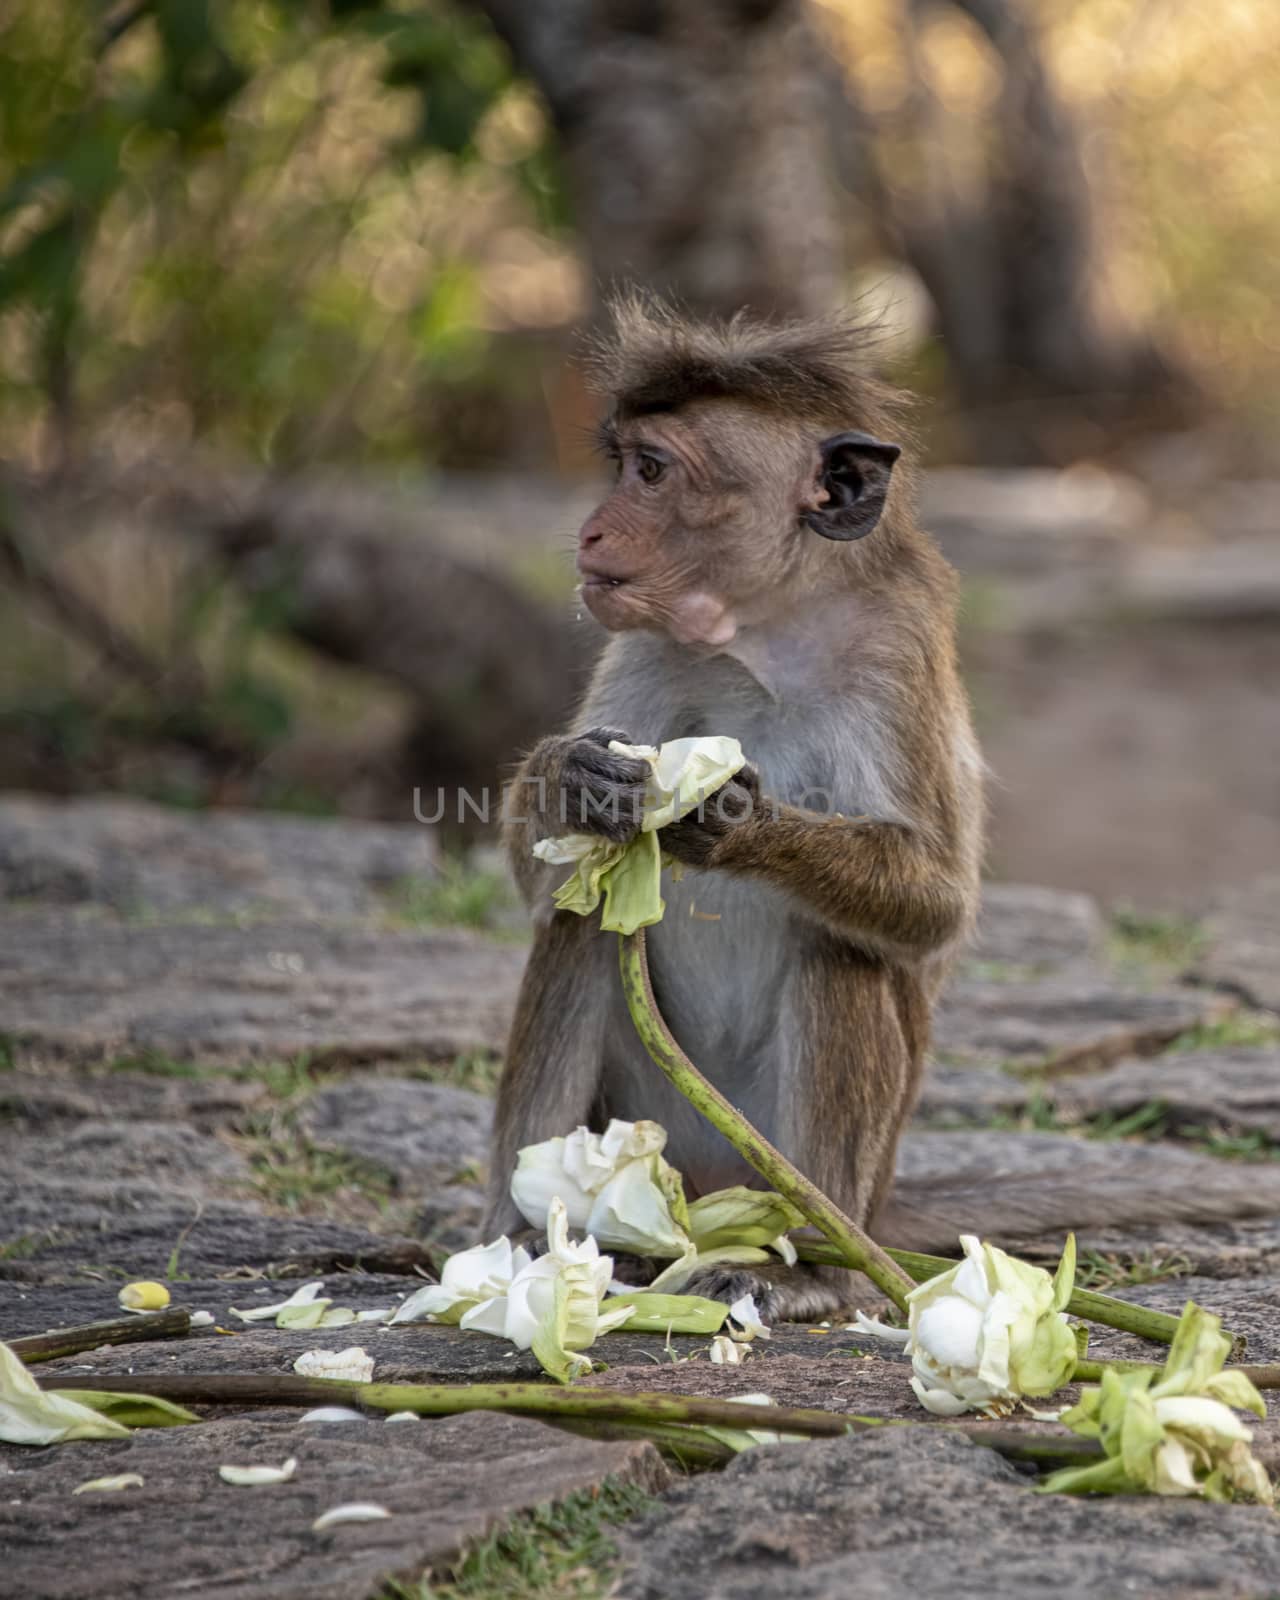 Sri lanka, Dambulla - Aug 2015: Toque macaque, eating stolen Lotus blooms, given as temple offerings